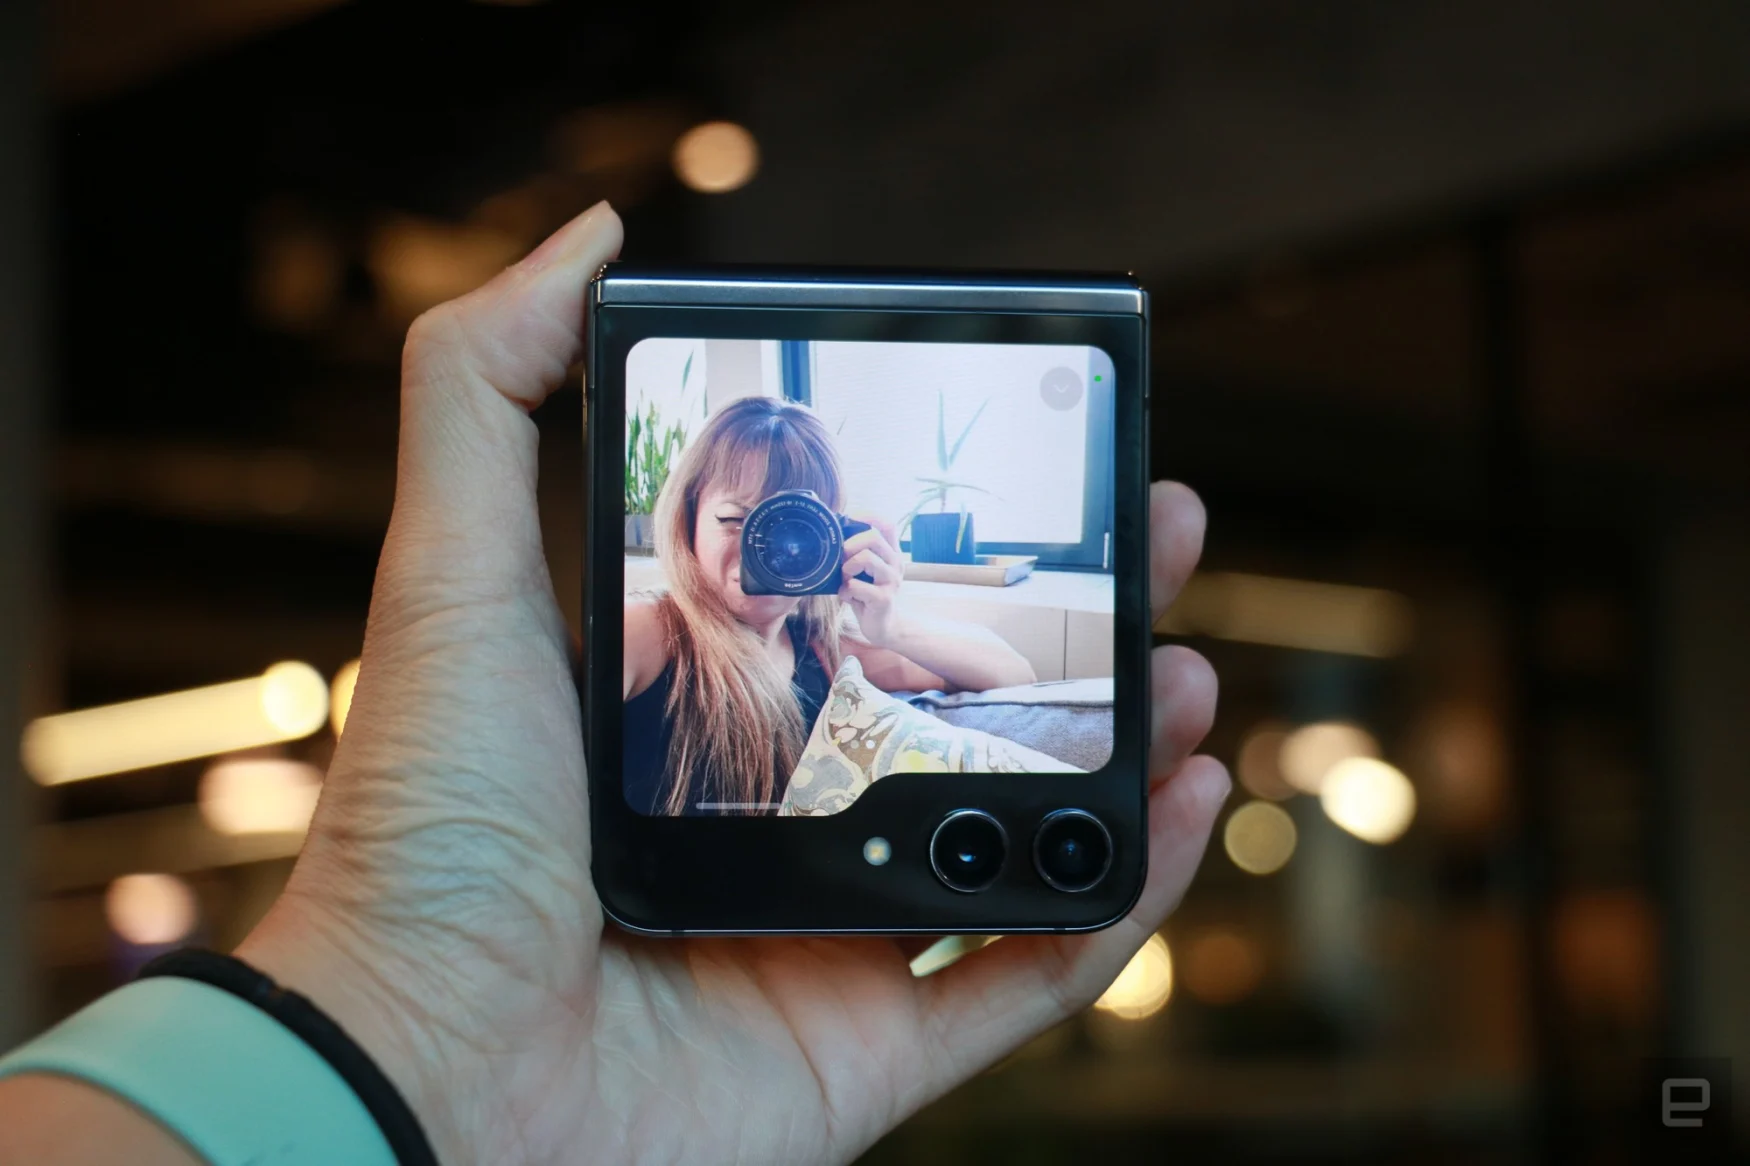 The Samsung Galaxy Z Flip 5 folded shut, held in mid-air. Its external screen shots a person taking a photo of the camera viewfinder feature.